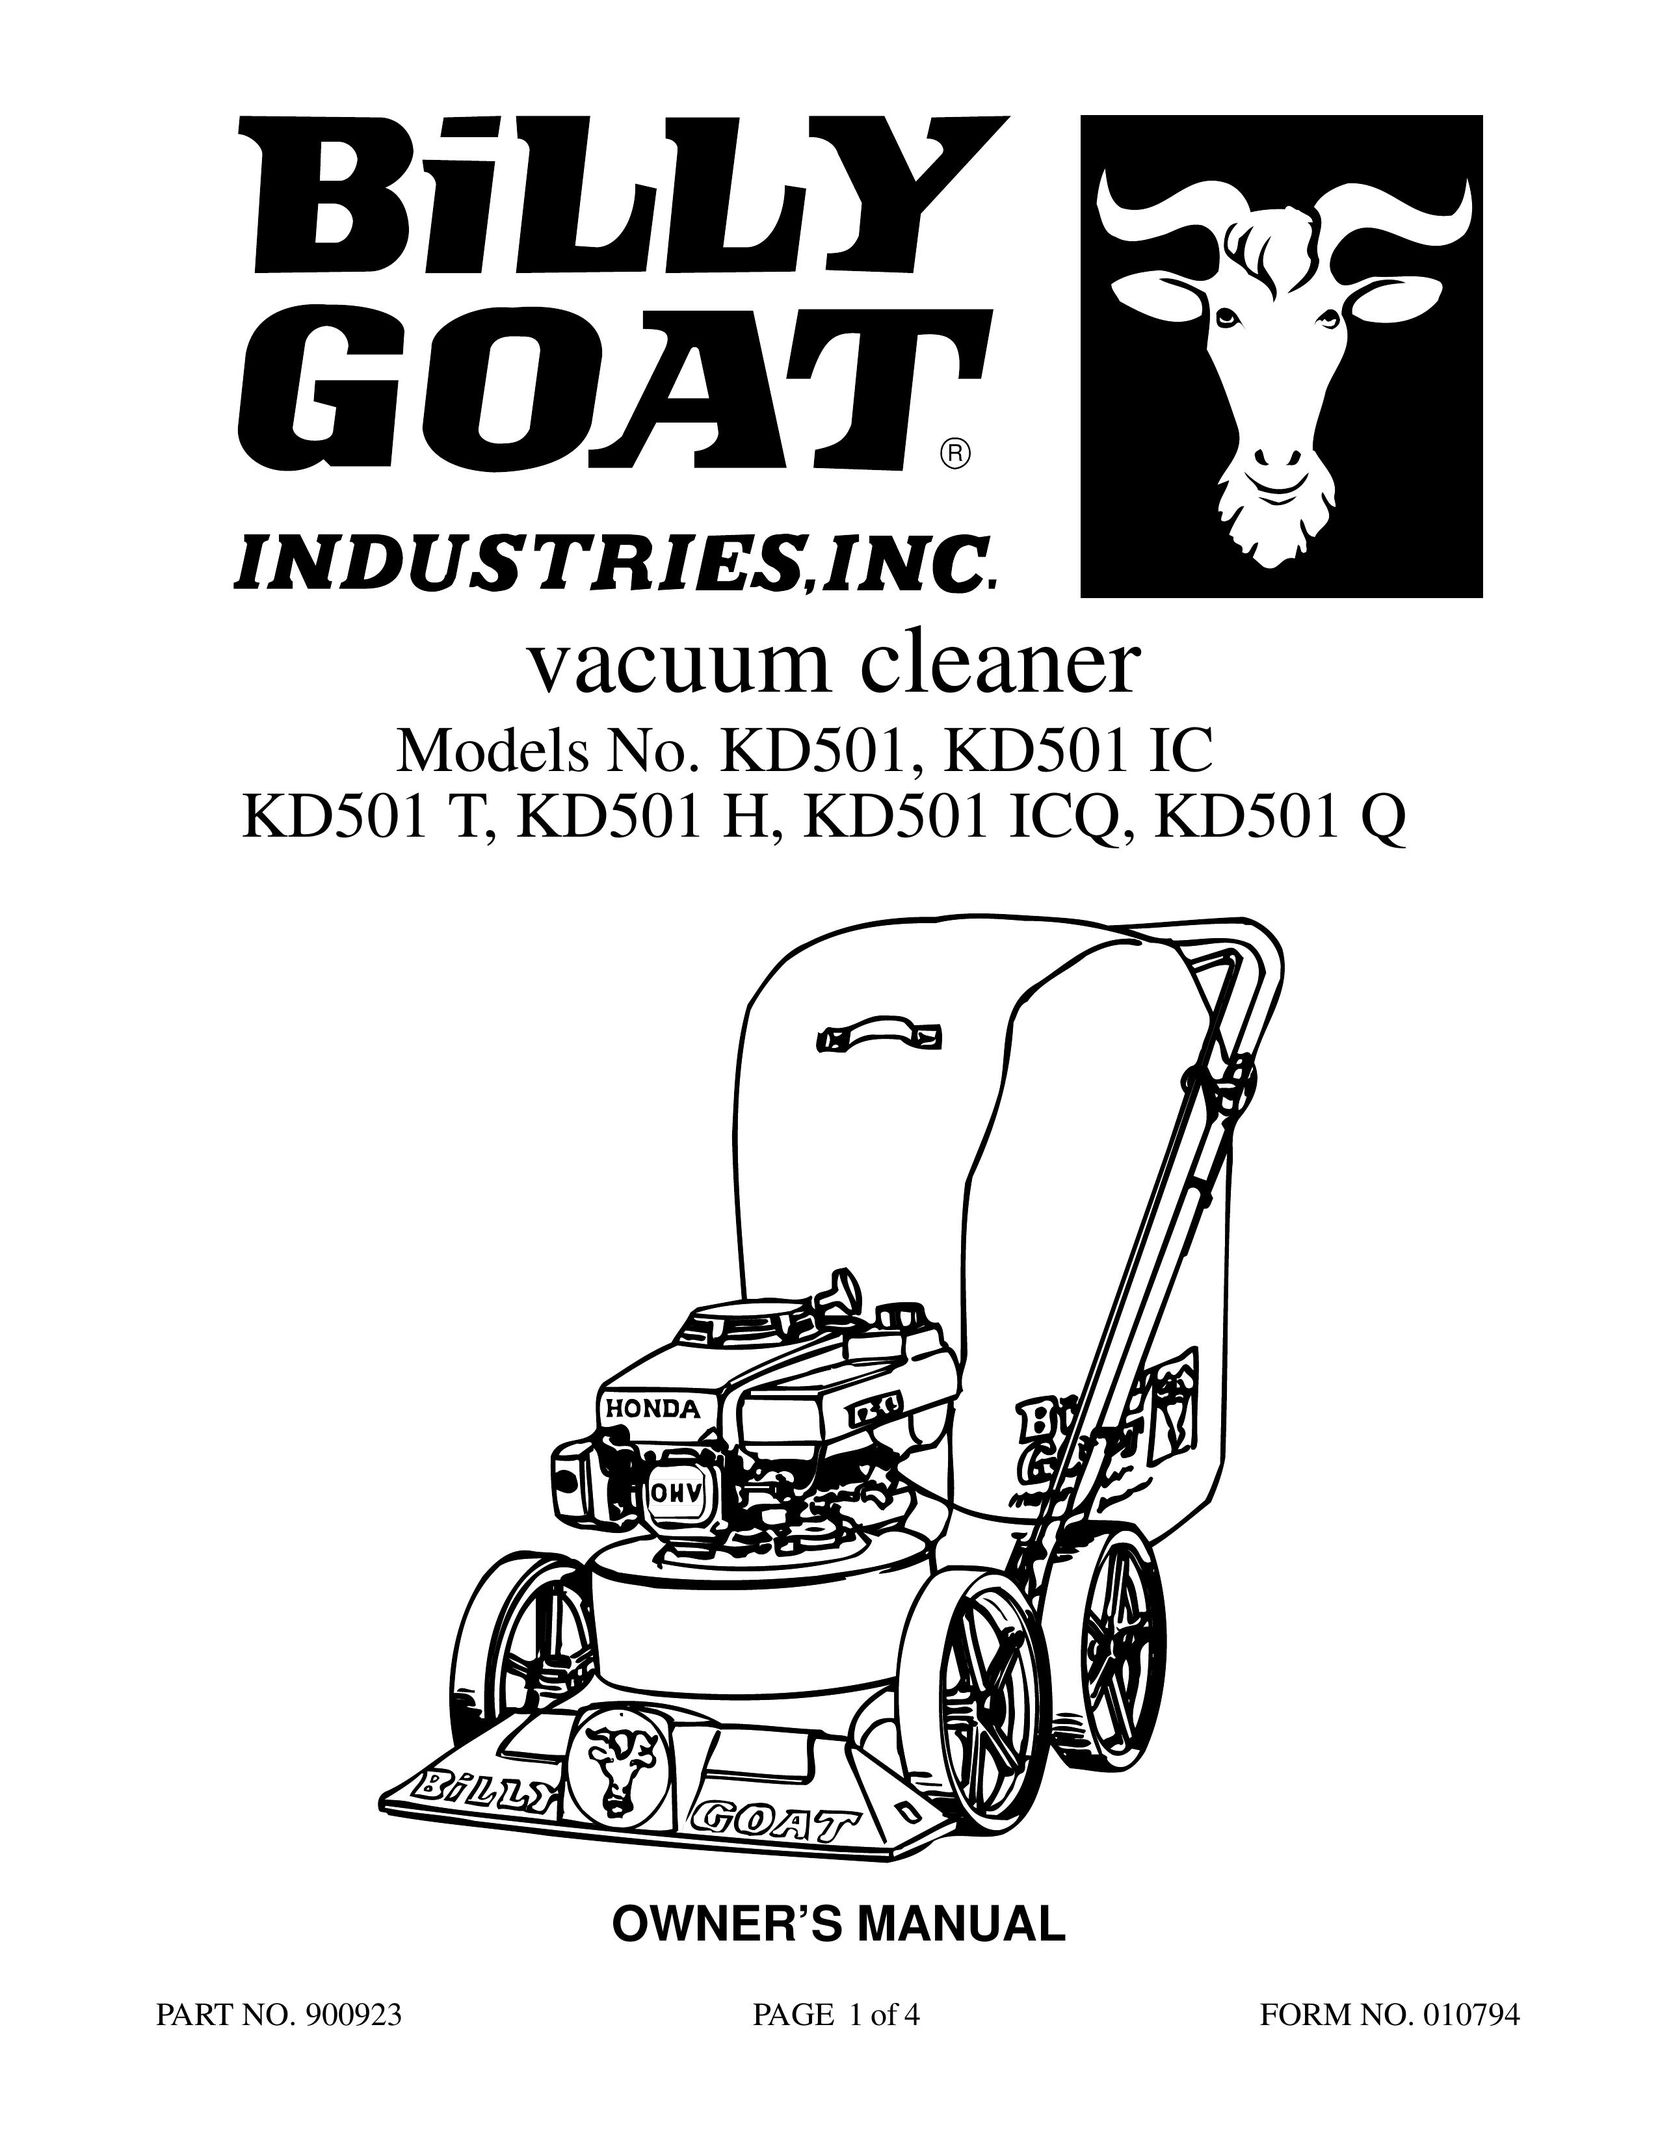 Billy Goat KD501 ICQ Vacuum Cleaner User Manual (Page 1)